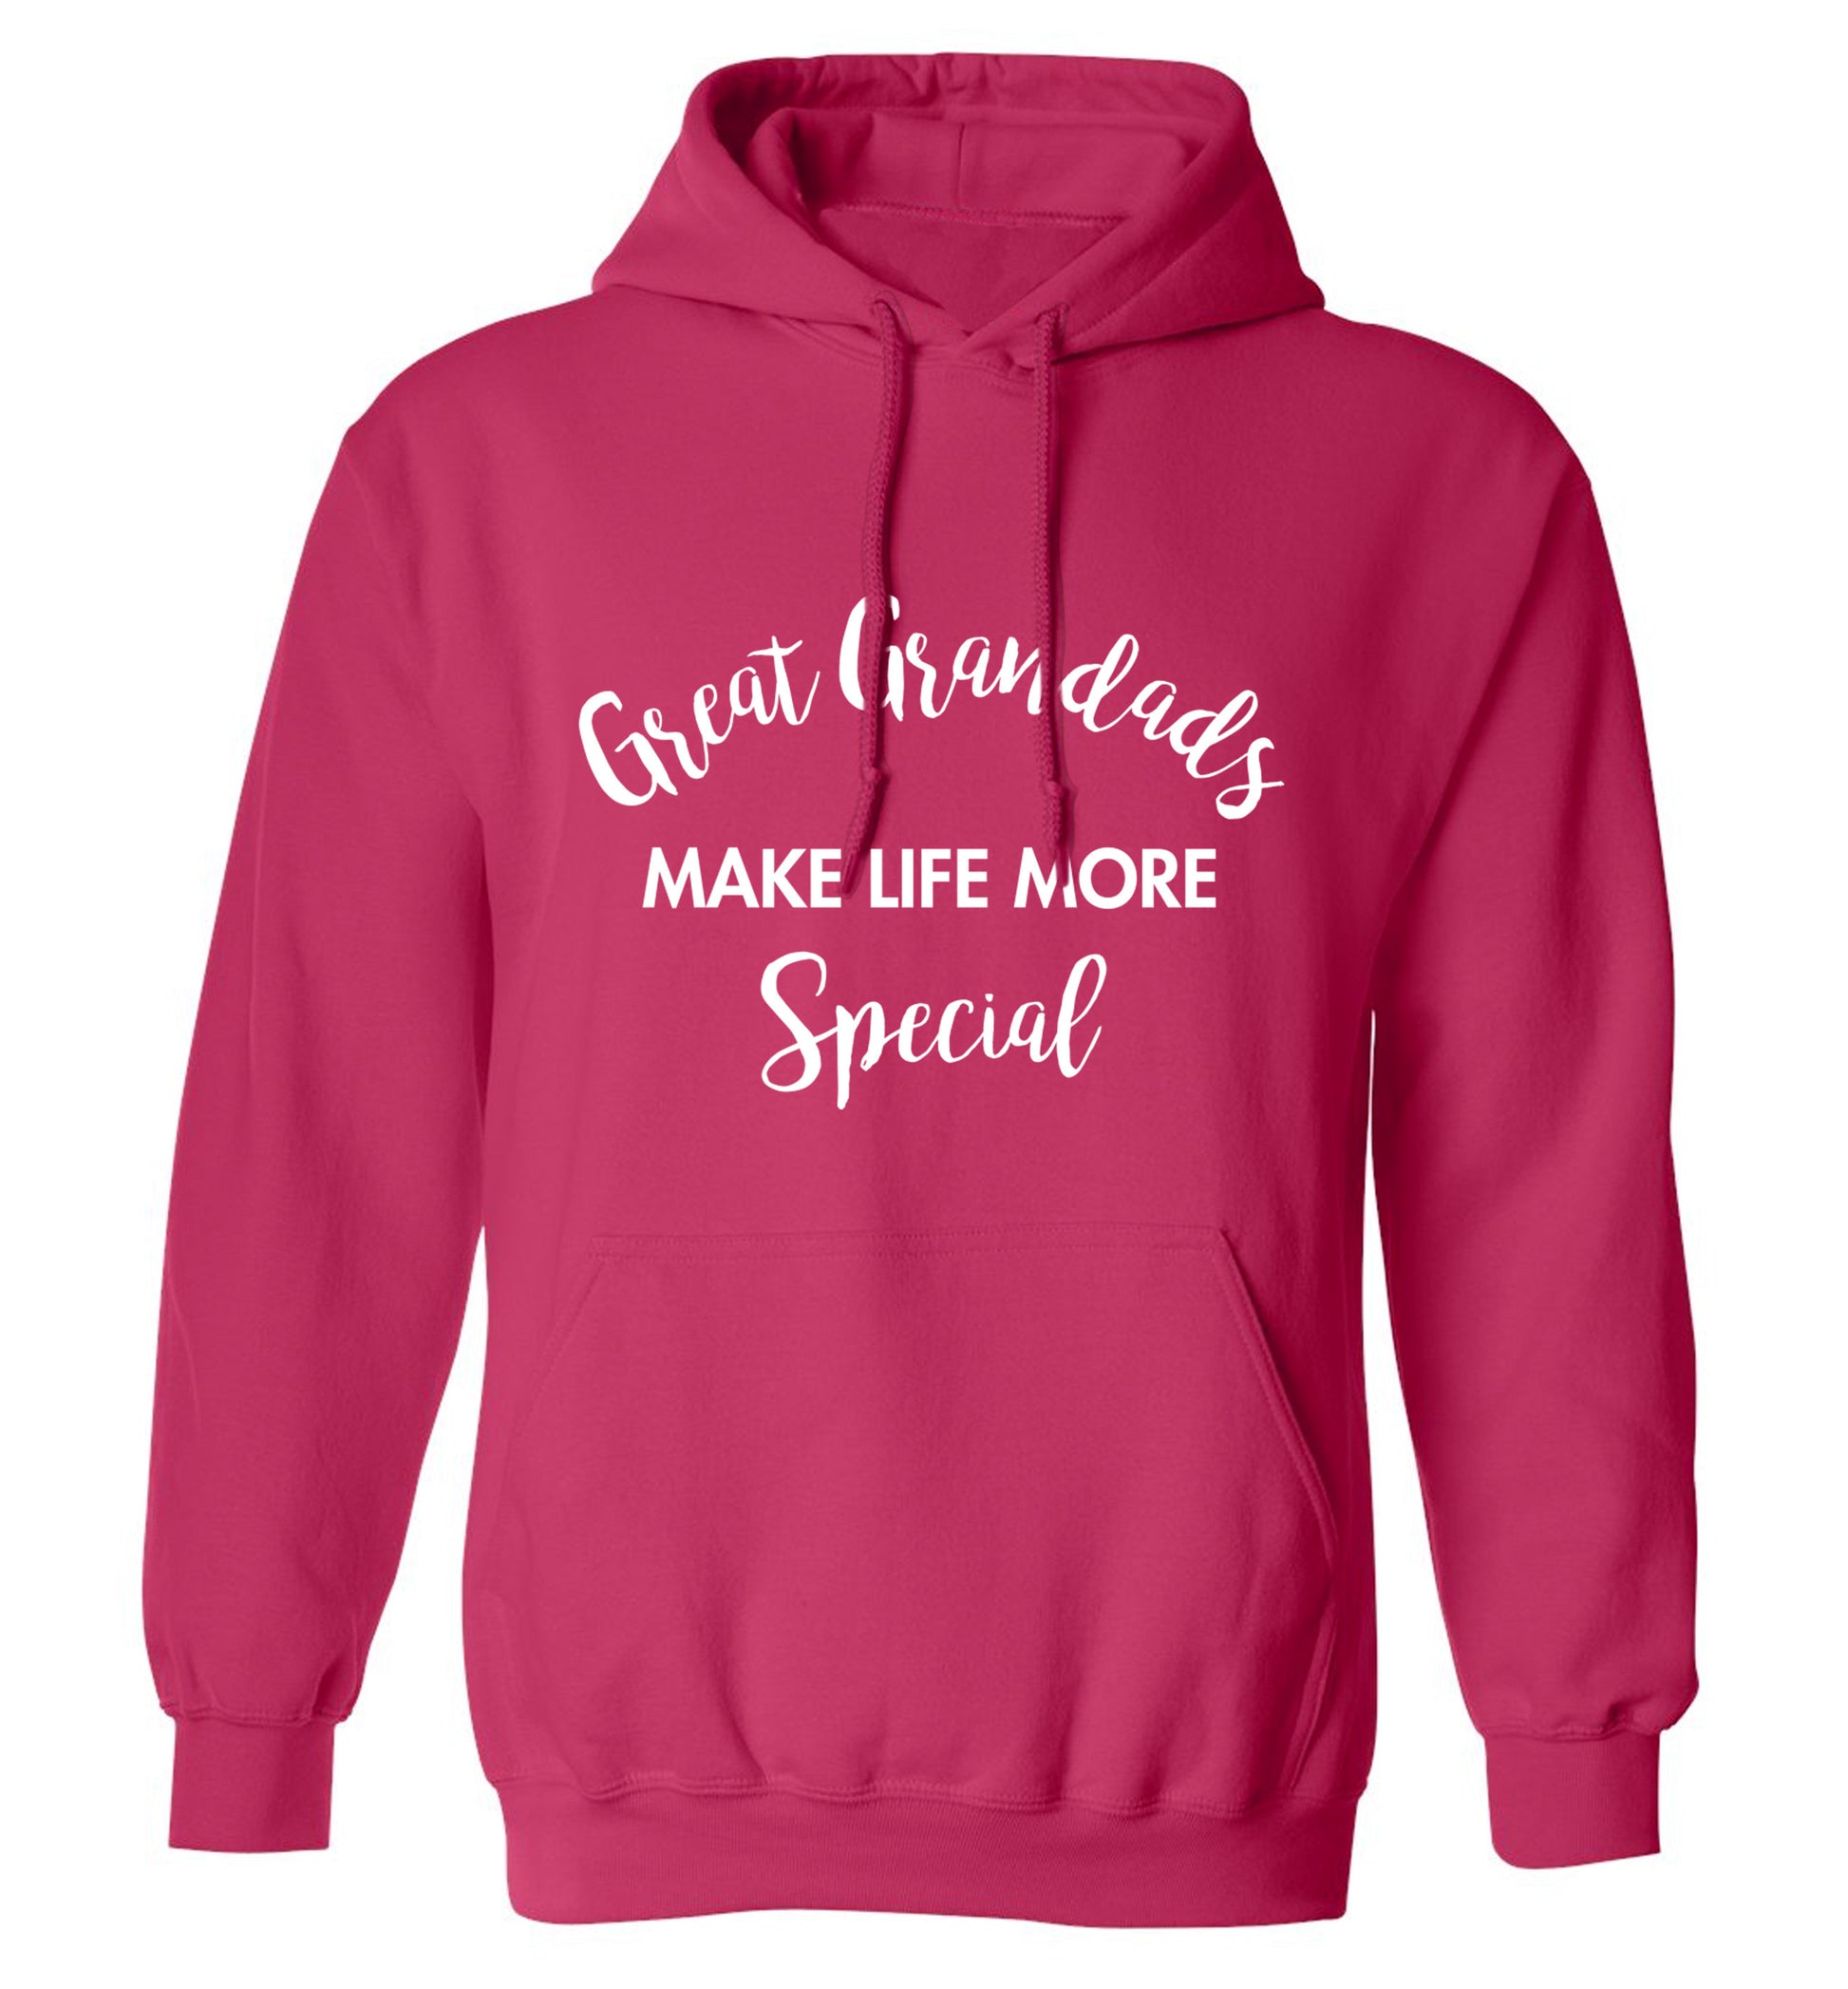 Great Grandads make life more special adults unisex pink hoodie 2XL